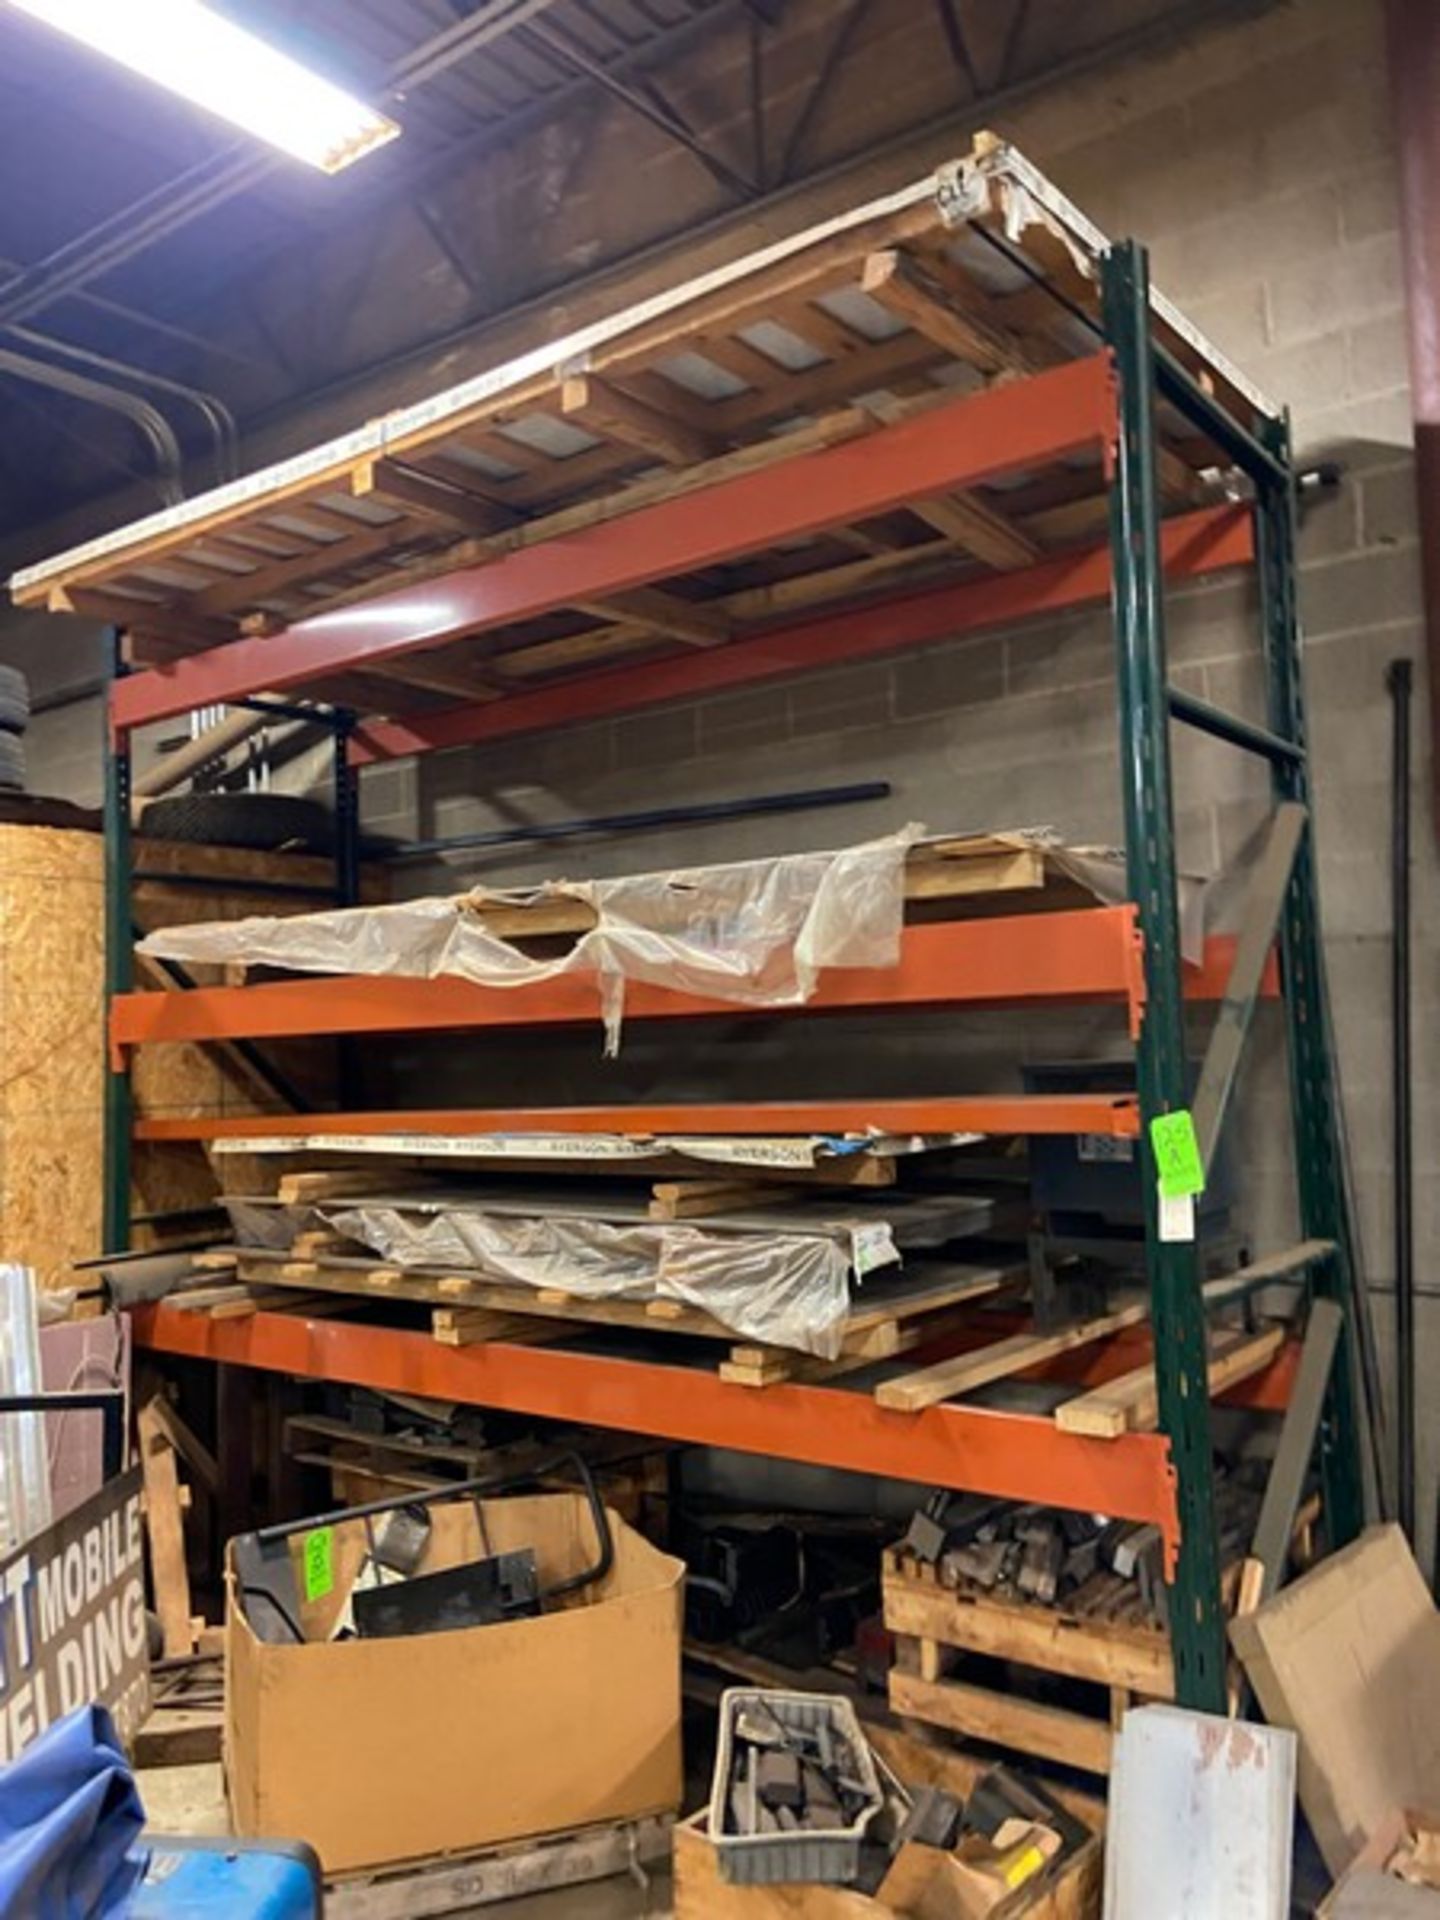 Rigid-U-Rak Rack System, Overall Dims.: Aprox. 3-1/2 ft. x 12 ft. x 11 ft. Tall (LOCATED IN CORRY, - Image 2 of 3